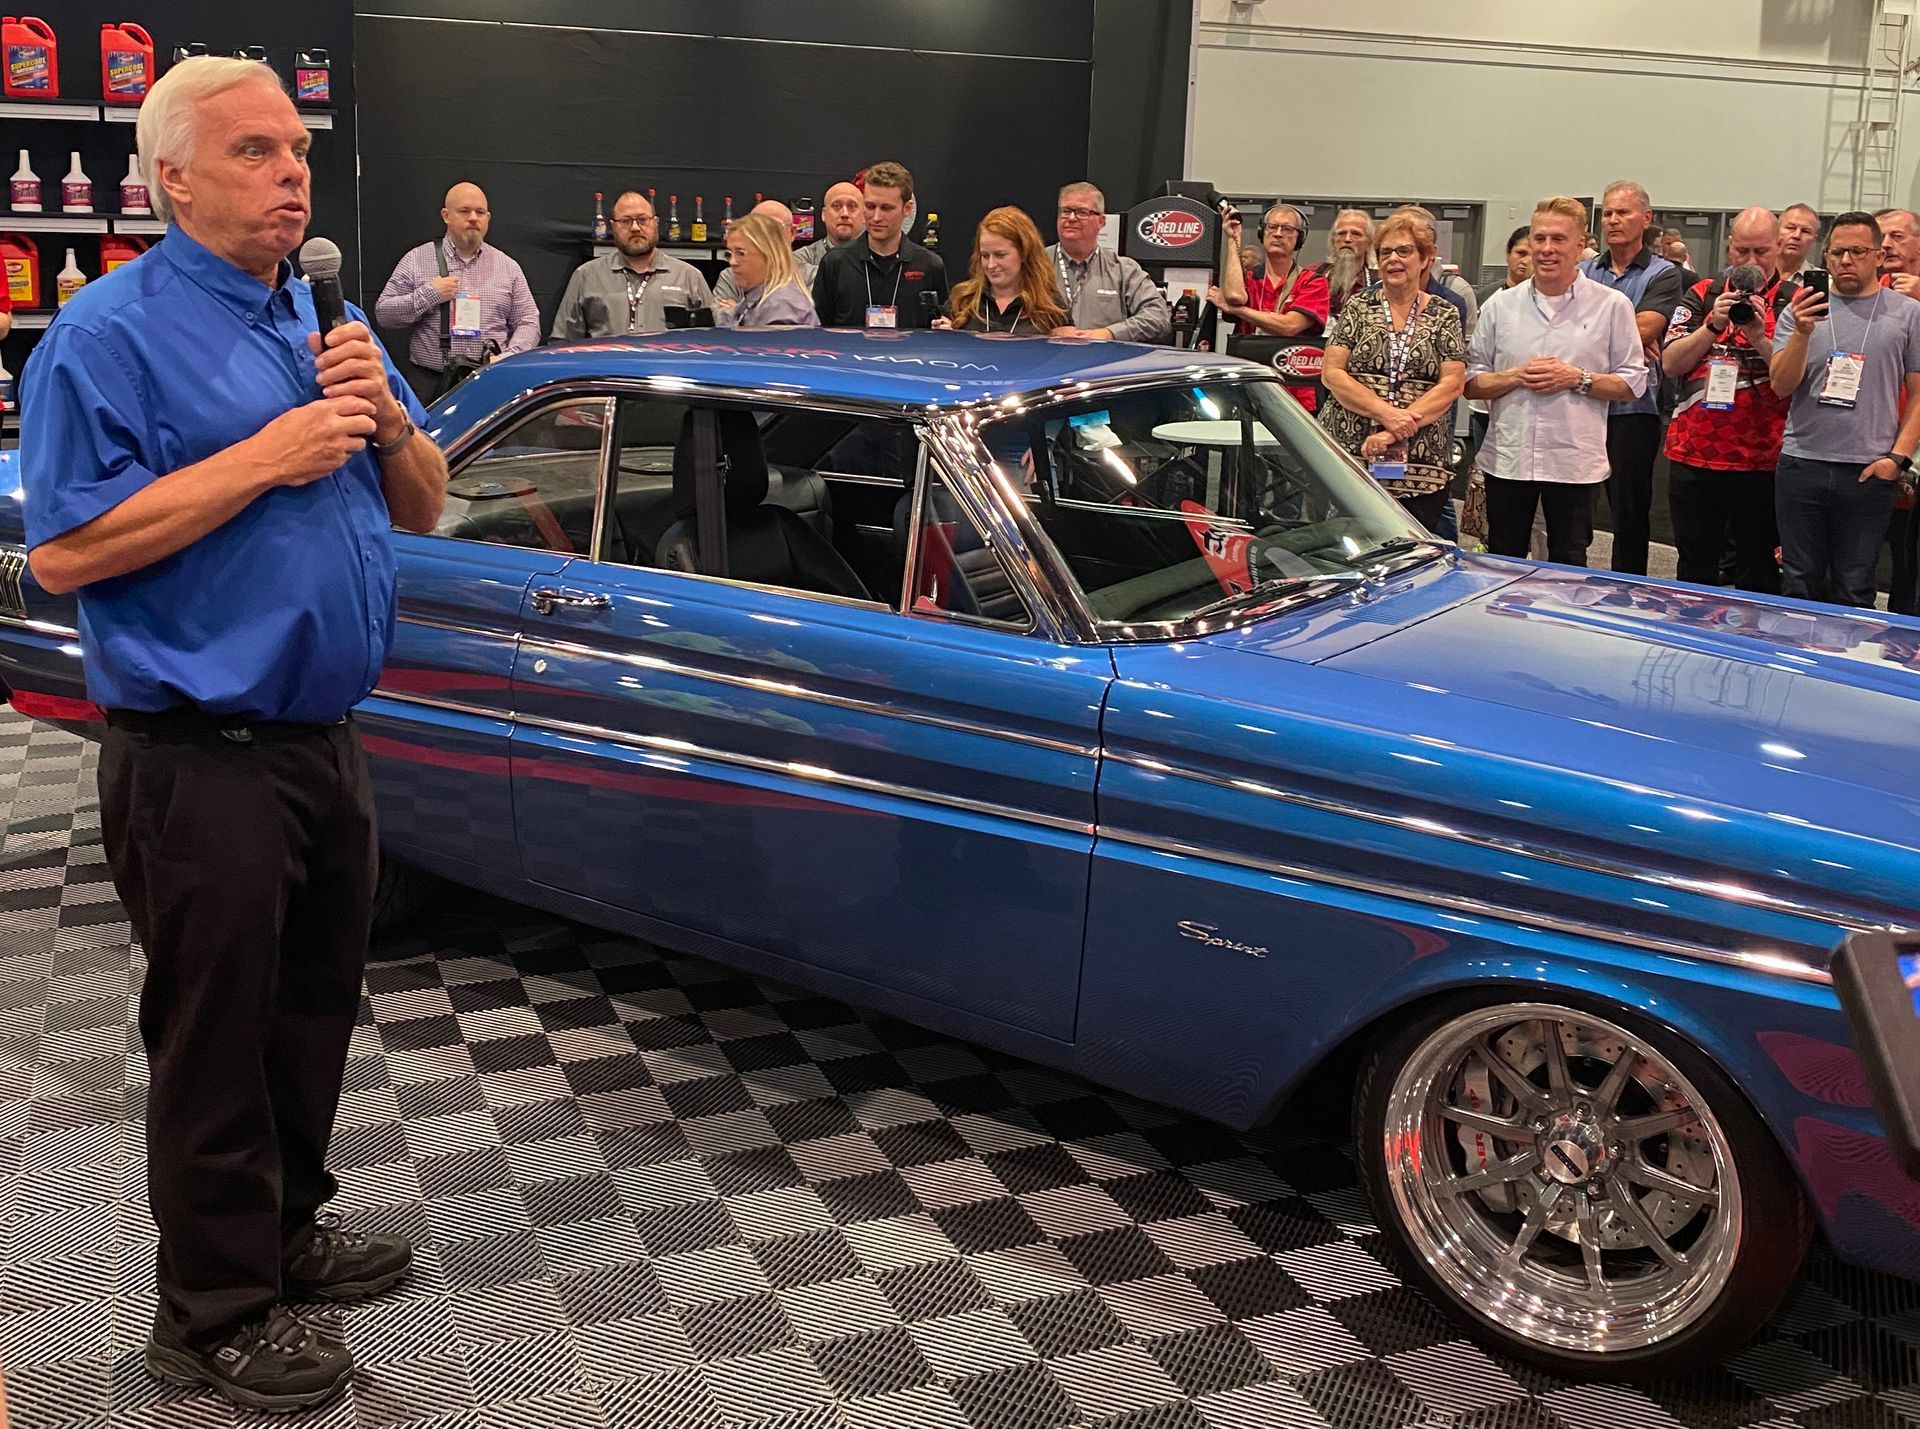 Arrington Performance CEO Mike Copland and his visionary 1964 Ford Falcon